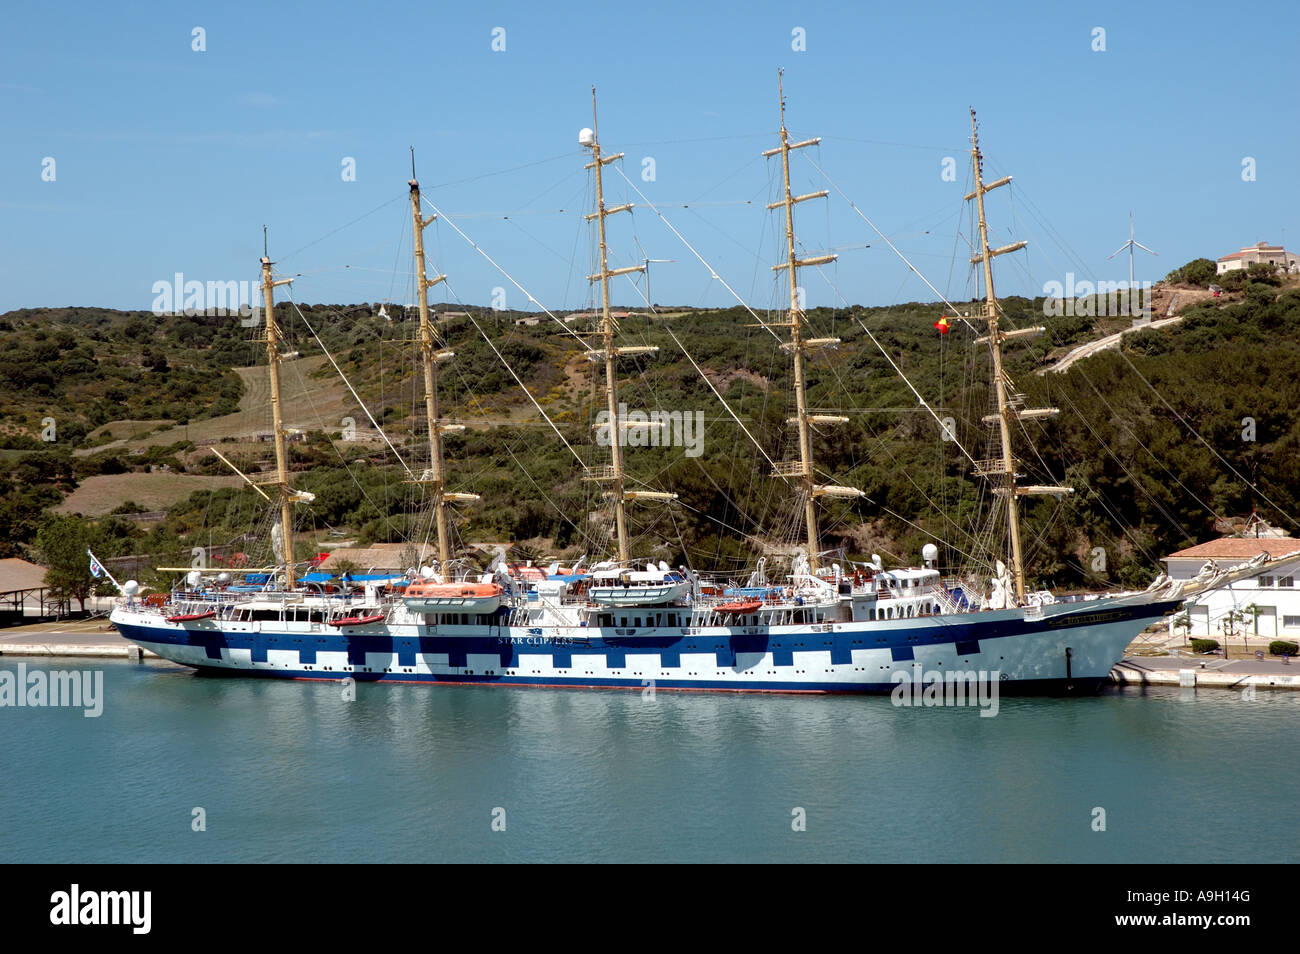 Five-masted sailing ship Royal Clipper berthed in Mahon harbour Stock Photo